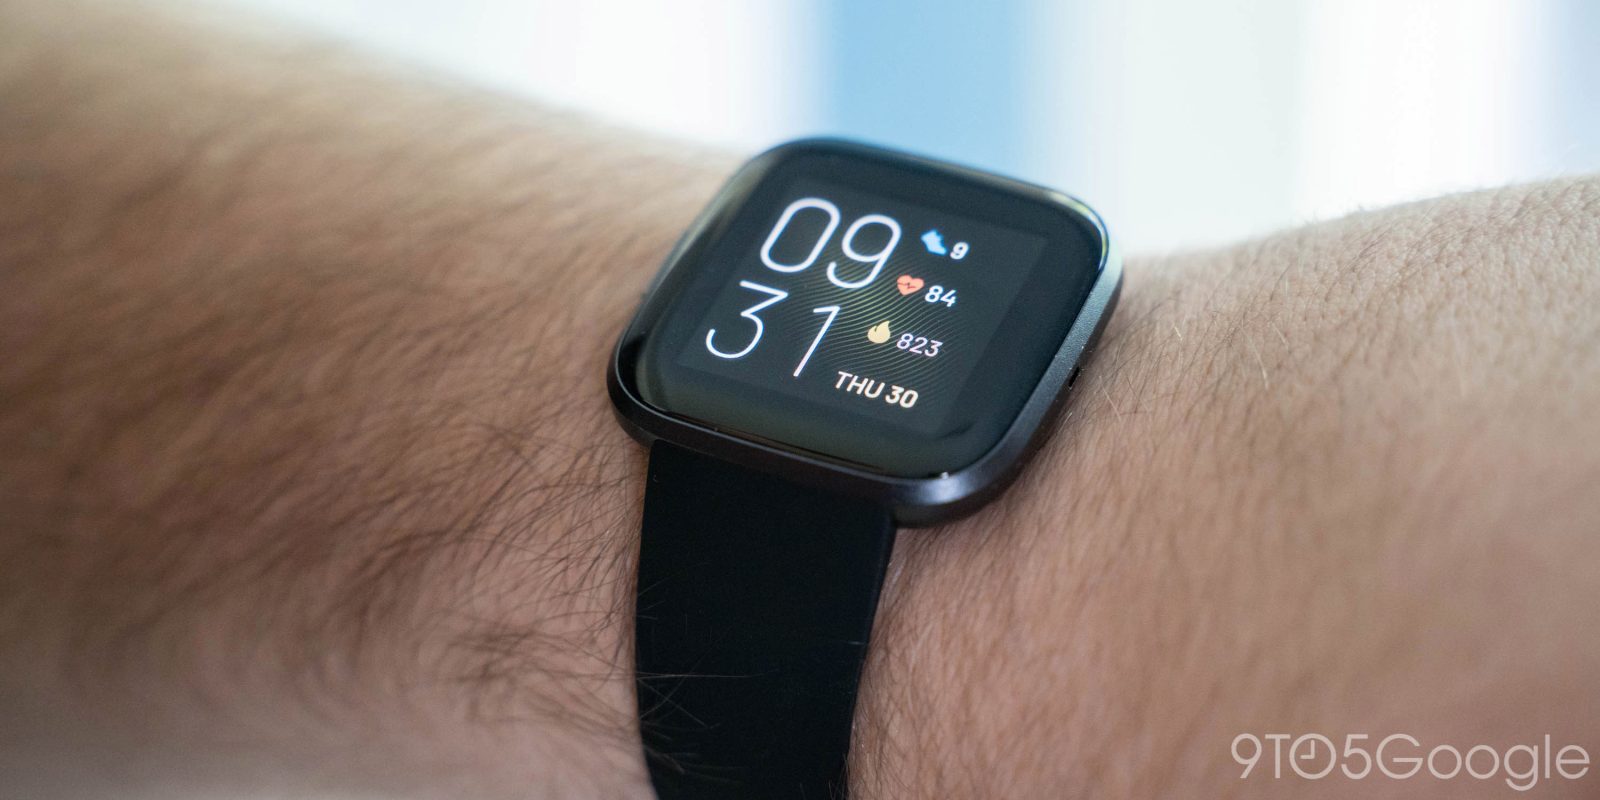 Google to Sweeten Fitbit Concessions, Heading for EU Approval